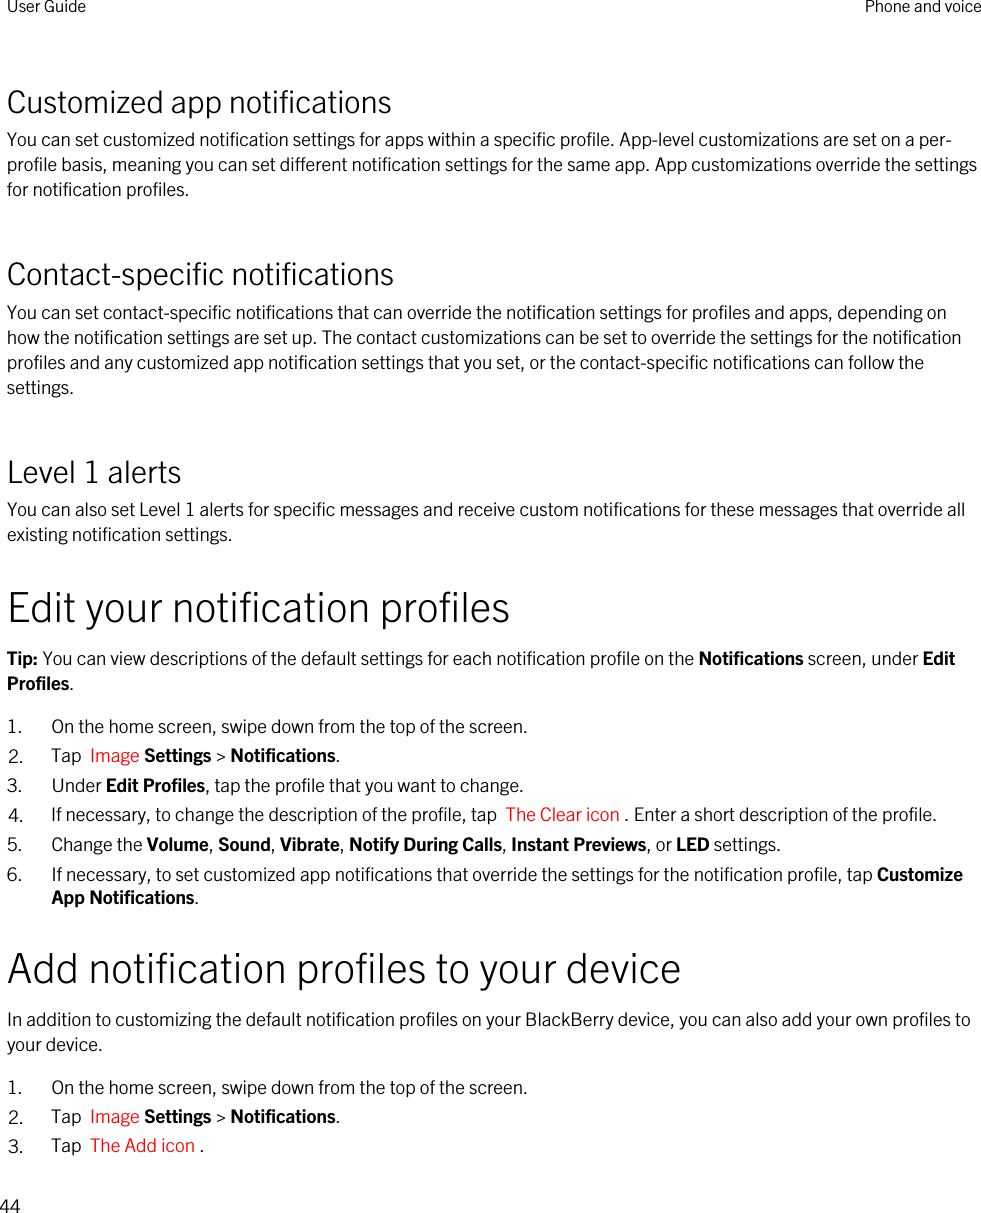 Customized app notificationsYou can set customized notification settings for apps within a specific profile. App-level customizations are set on a per-profile basis, meaning you can set different notification settings for the same app. App customizations override the settings for notification profiles.Contact-specific notificationsYou can set contact-specific notifications that can override the notification settings for profiles and apps, depending on how the notification settings are set up. The contact customizations can be set to override the settings for the notification profiles and any customized app notification settings that you set, or the contact-specific notifications can follow the settings.Level 1 alertsYou can also set Level 1 alerts for specific messages and receive custom notifications for these messages that override all existing notification settings.Edit your notification profilesTip: You can view descriptions of the default settings for each notification profile on the Notifications screen, under Edit Profiles.1. On the home screen, swipe down from the top of the screen.2. Tap  Image Settings &gt; Notifications.3. Under Edit Profiles, tap the profile that you want to change.4. If necessary, to change the description of the profile, tap  The Clear icon . Enter a short description of the profile.5. Change the Volume, Sound, Vibrate, Notify During Calls, Instant Previews, or LED settings.6. If necessary, to set customized app notifications that override the settings for the notification profile, tap Customize App Notifications.Add notification profiles to your deviceIn addition to customizing the default notification profiles on your BlackBerry device, you can also add your own profiles to your device.1. On the home screen, swipe down from the top of the screen.2. Tap  Image Settings &gt; Notifications.3. Tap  The Add icon .User Guide Phone and voice44